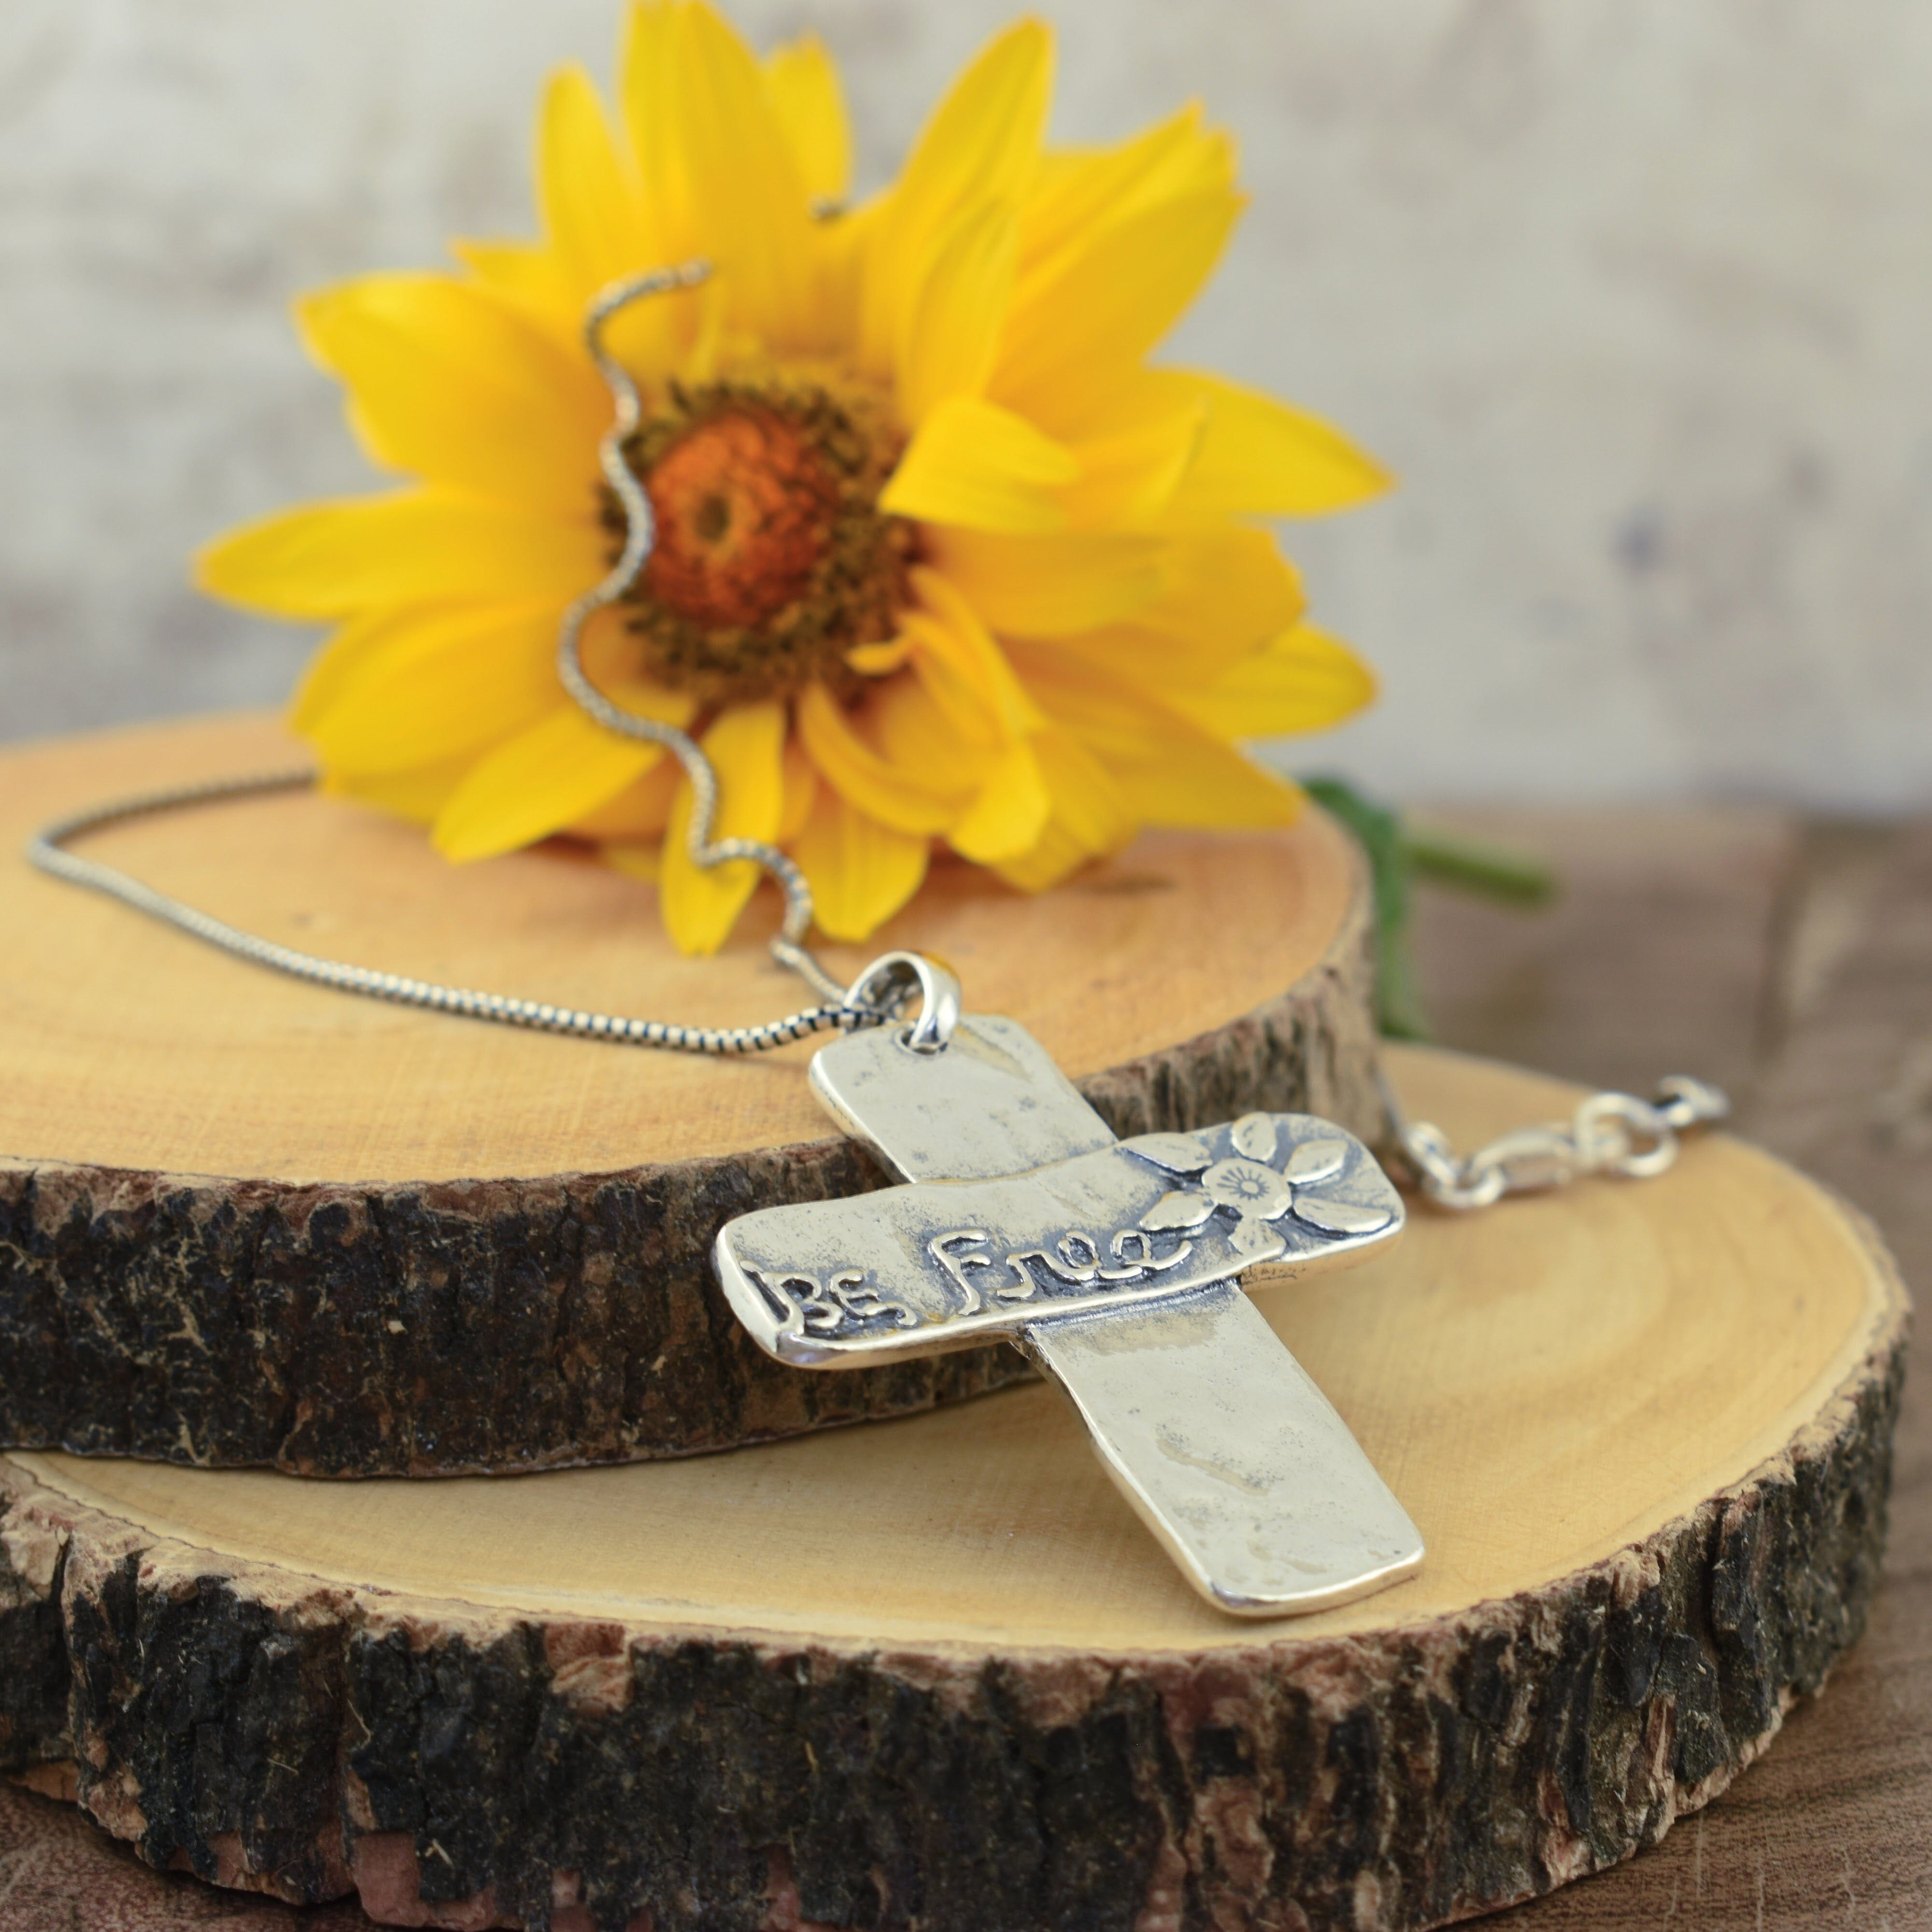 chunky cross necklace that says be free